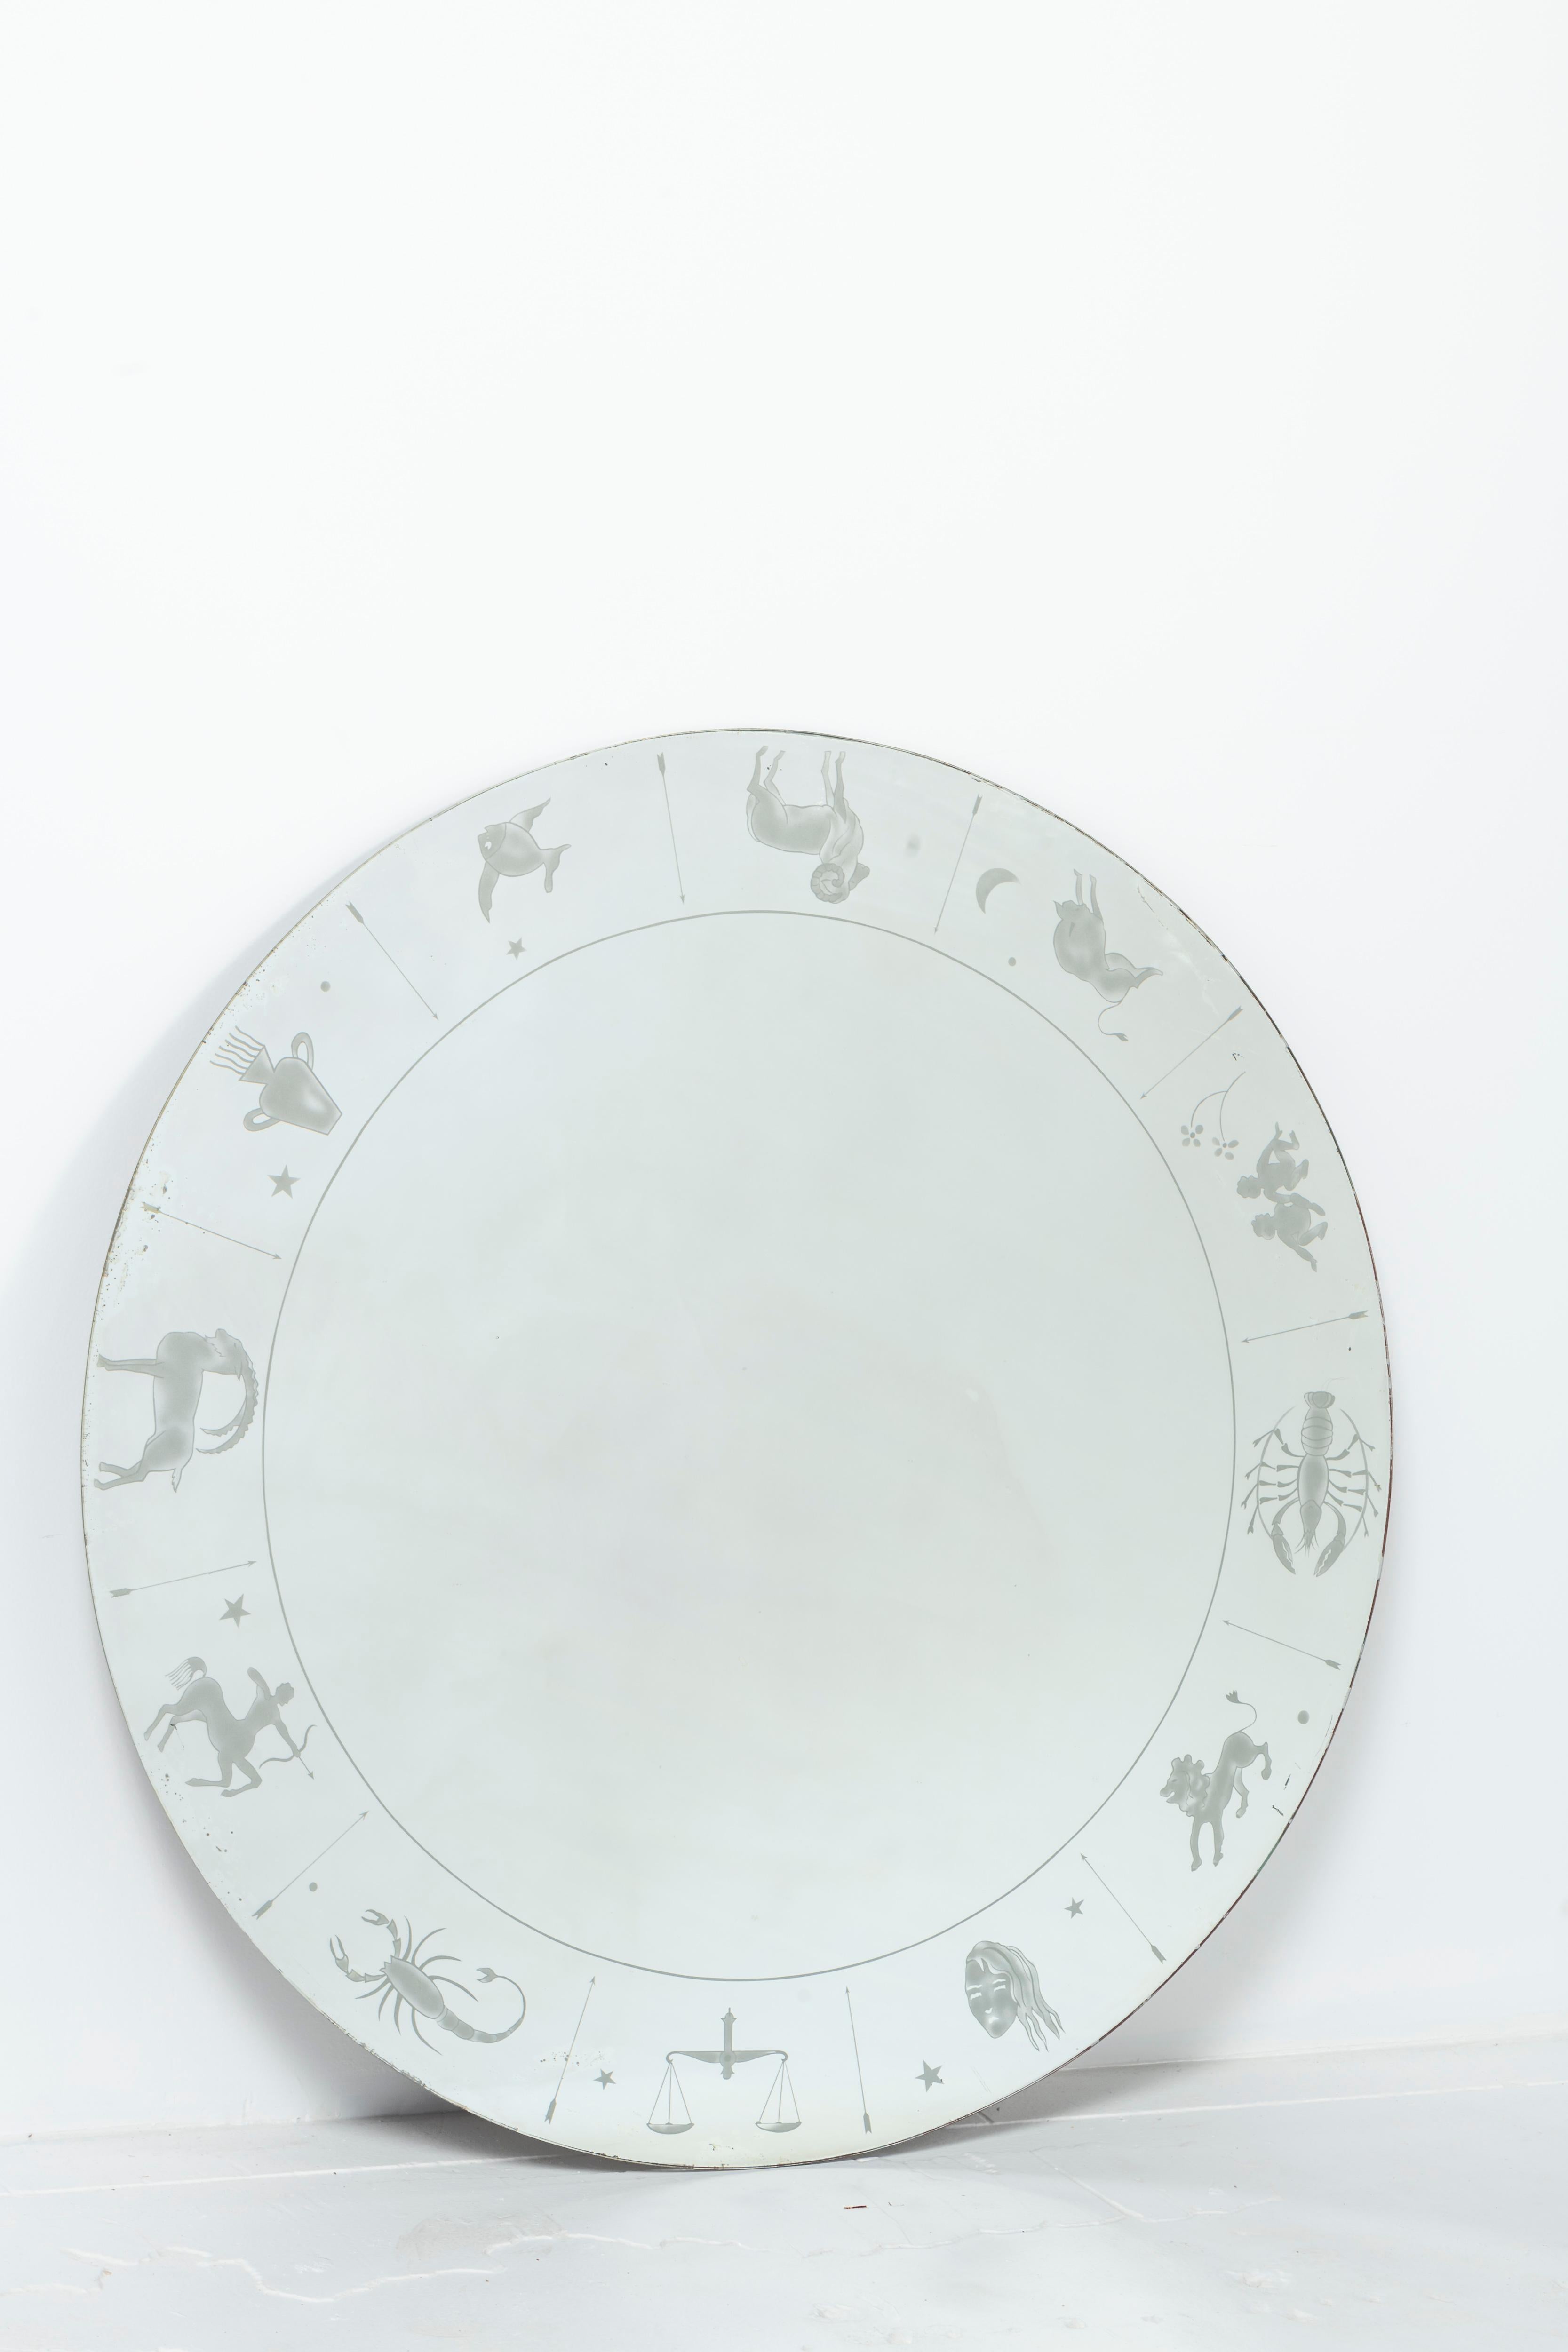 Mid-century Italian Zodiac mirror, unframed. This unusual mirror can be simply framed or installed or inserted atop a round table.